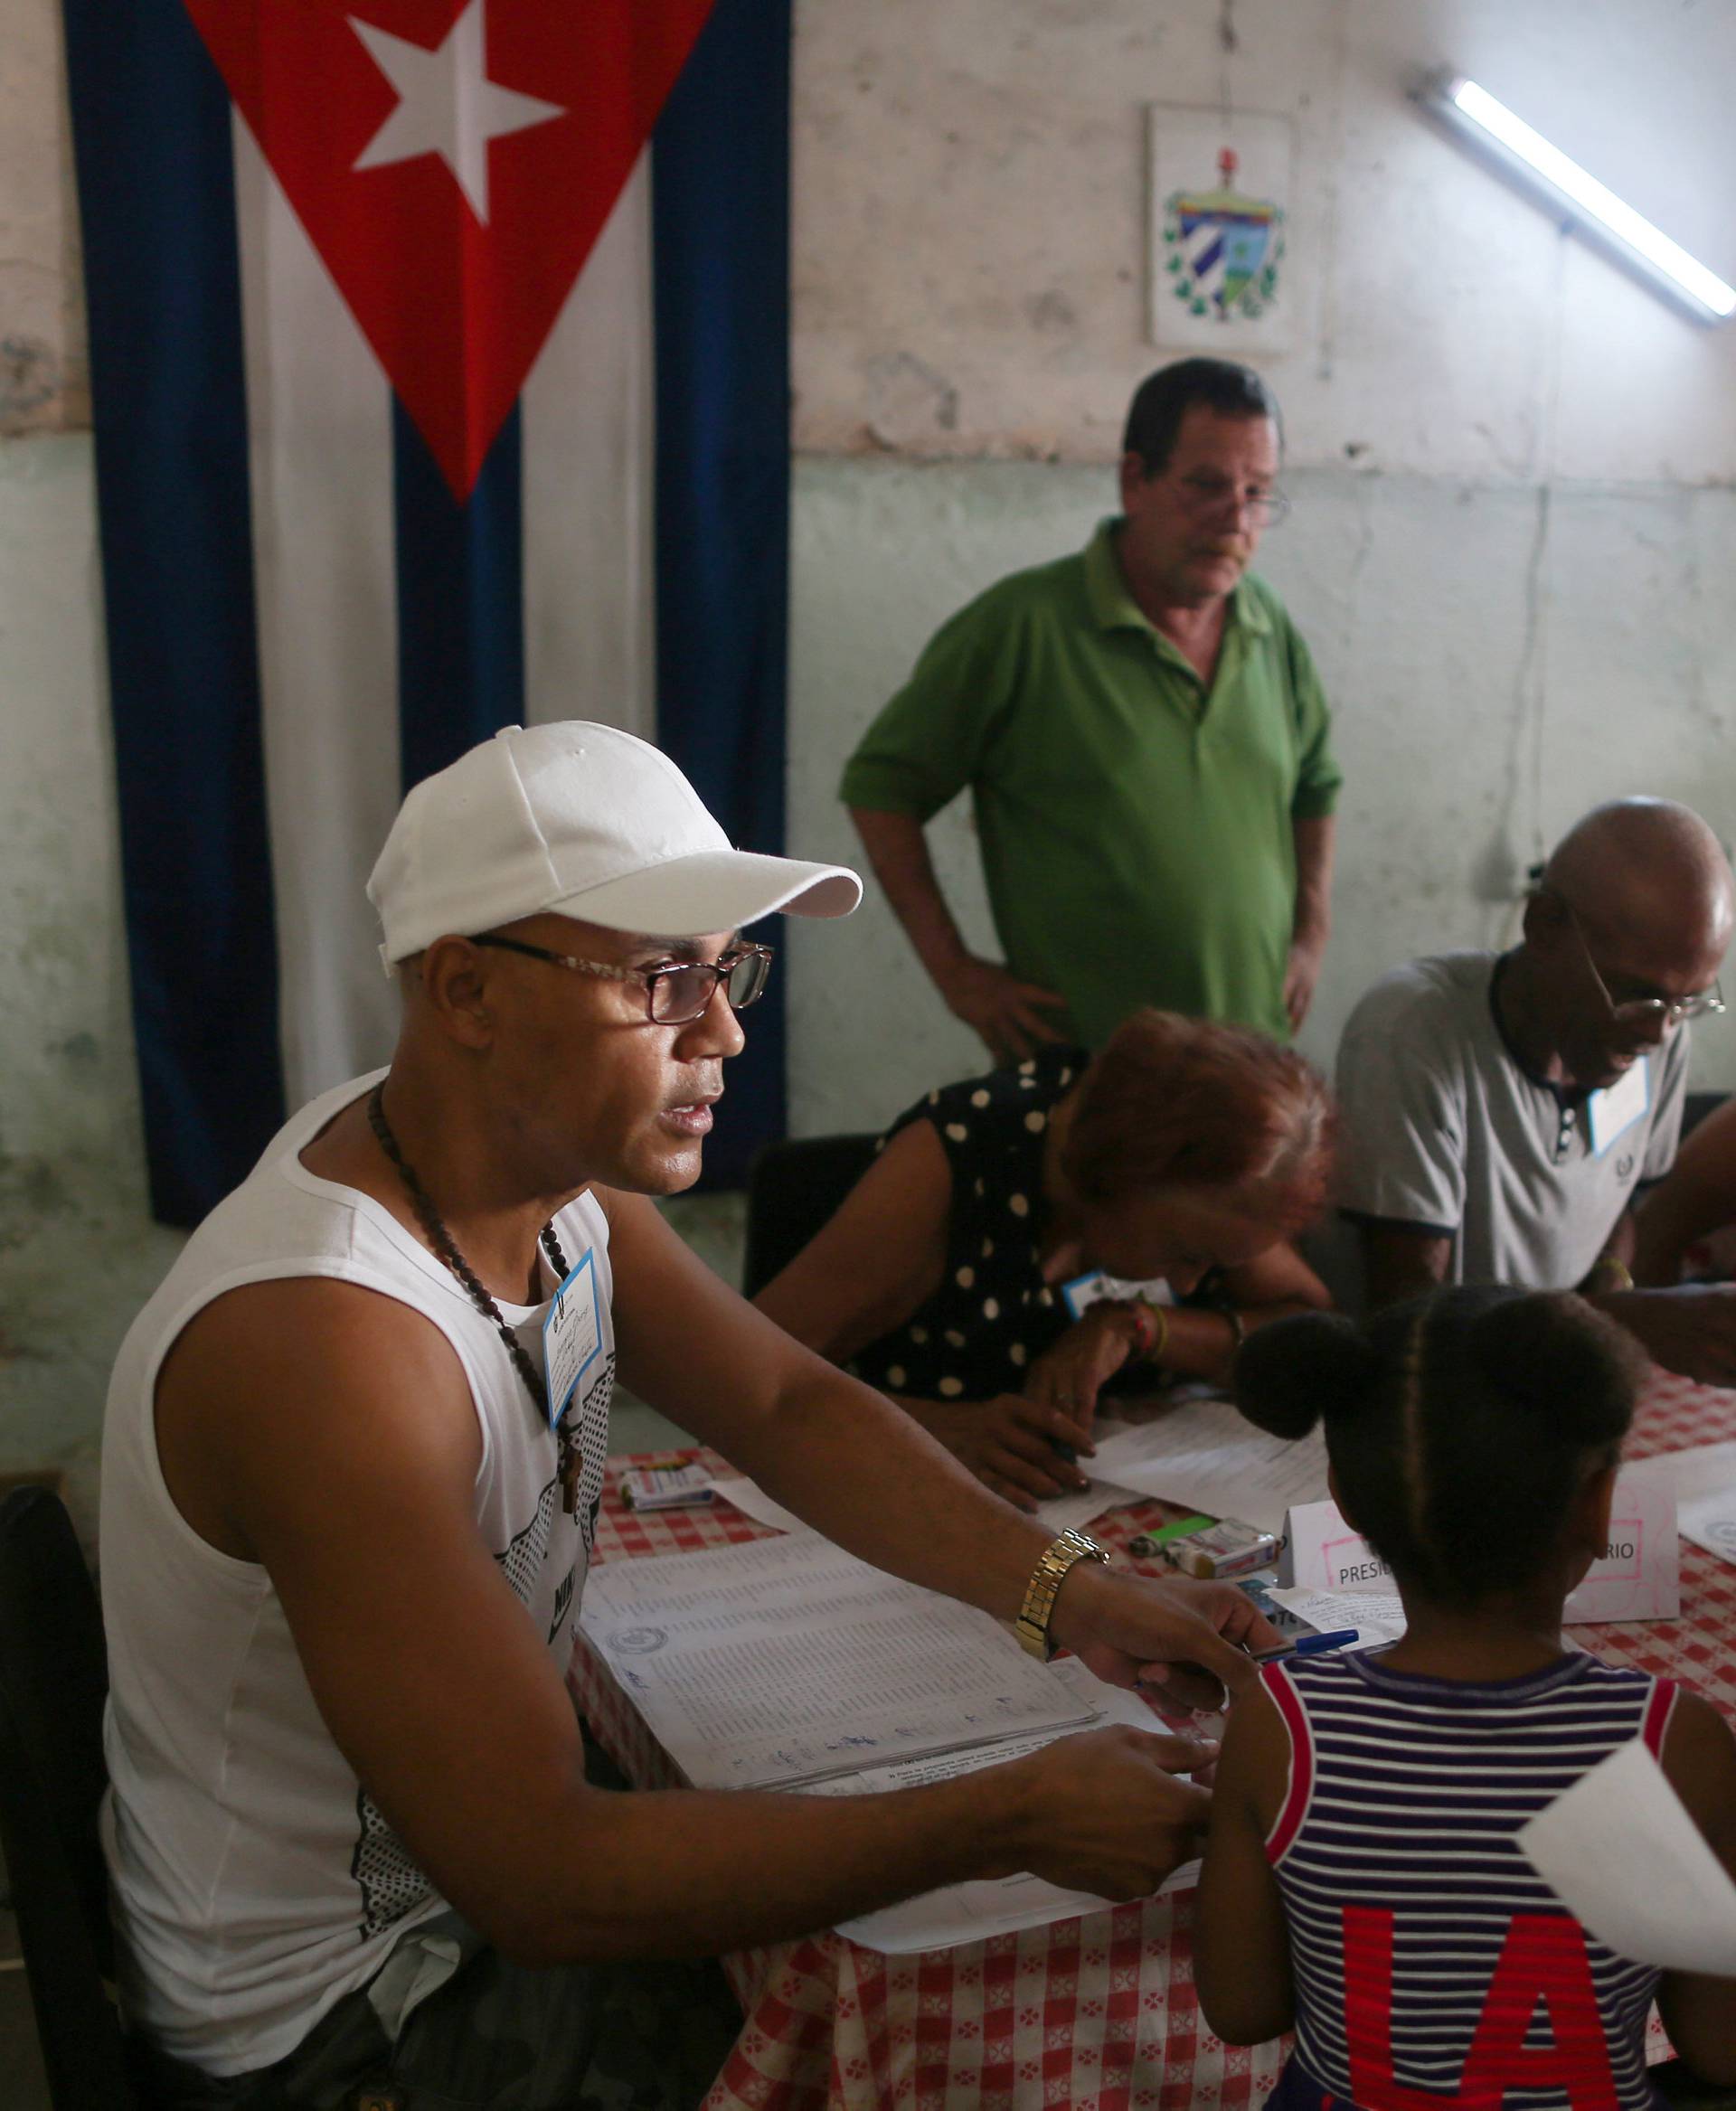 Election officials check the documents of a voter at a polling station during a constitutional referendum in Havana